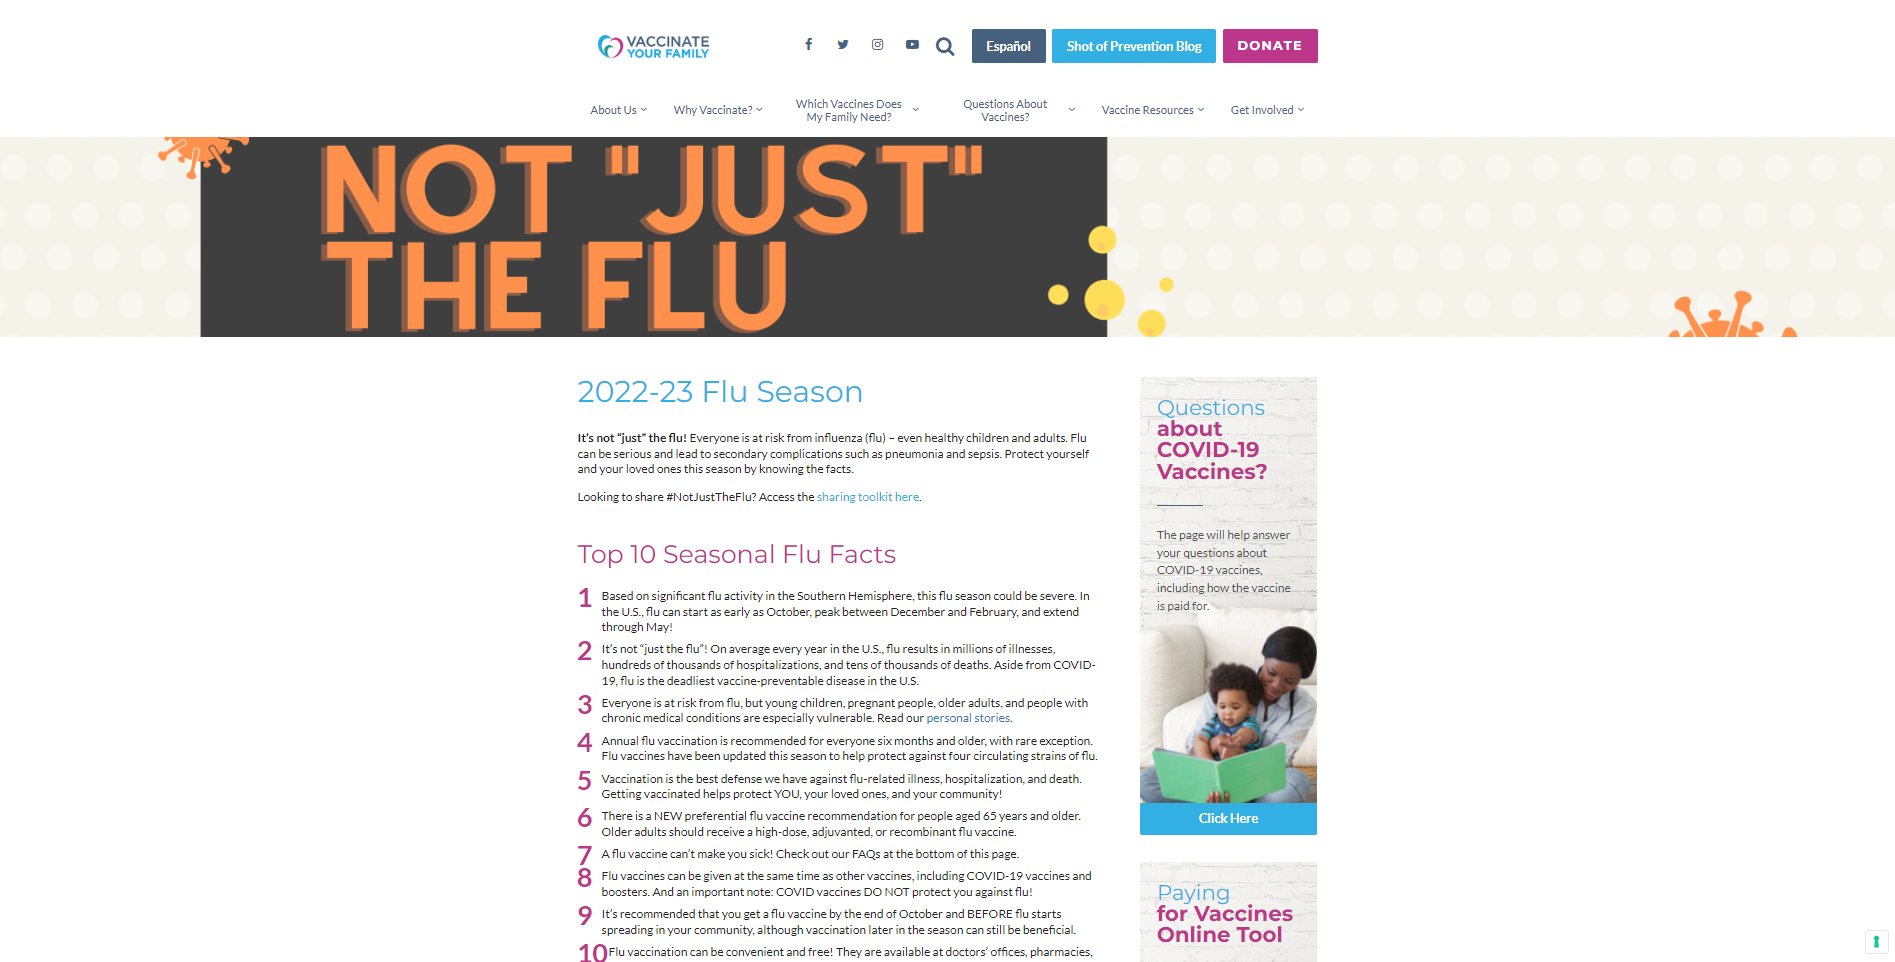 Website describing 10 seasonal flu facts with black, blue and magenta text on white background and black and orange title. Vaccinate Your Family logo is at the top on the page.